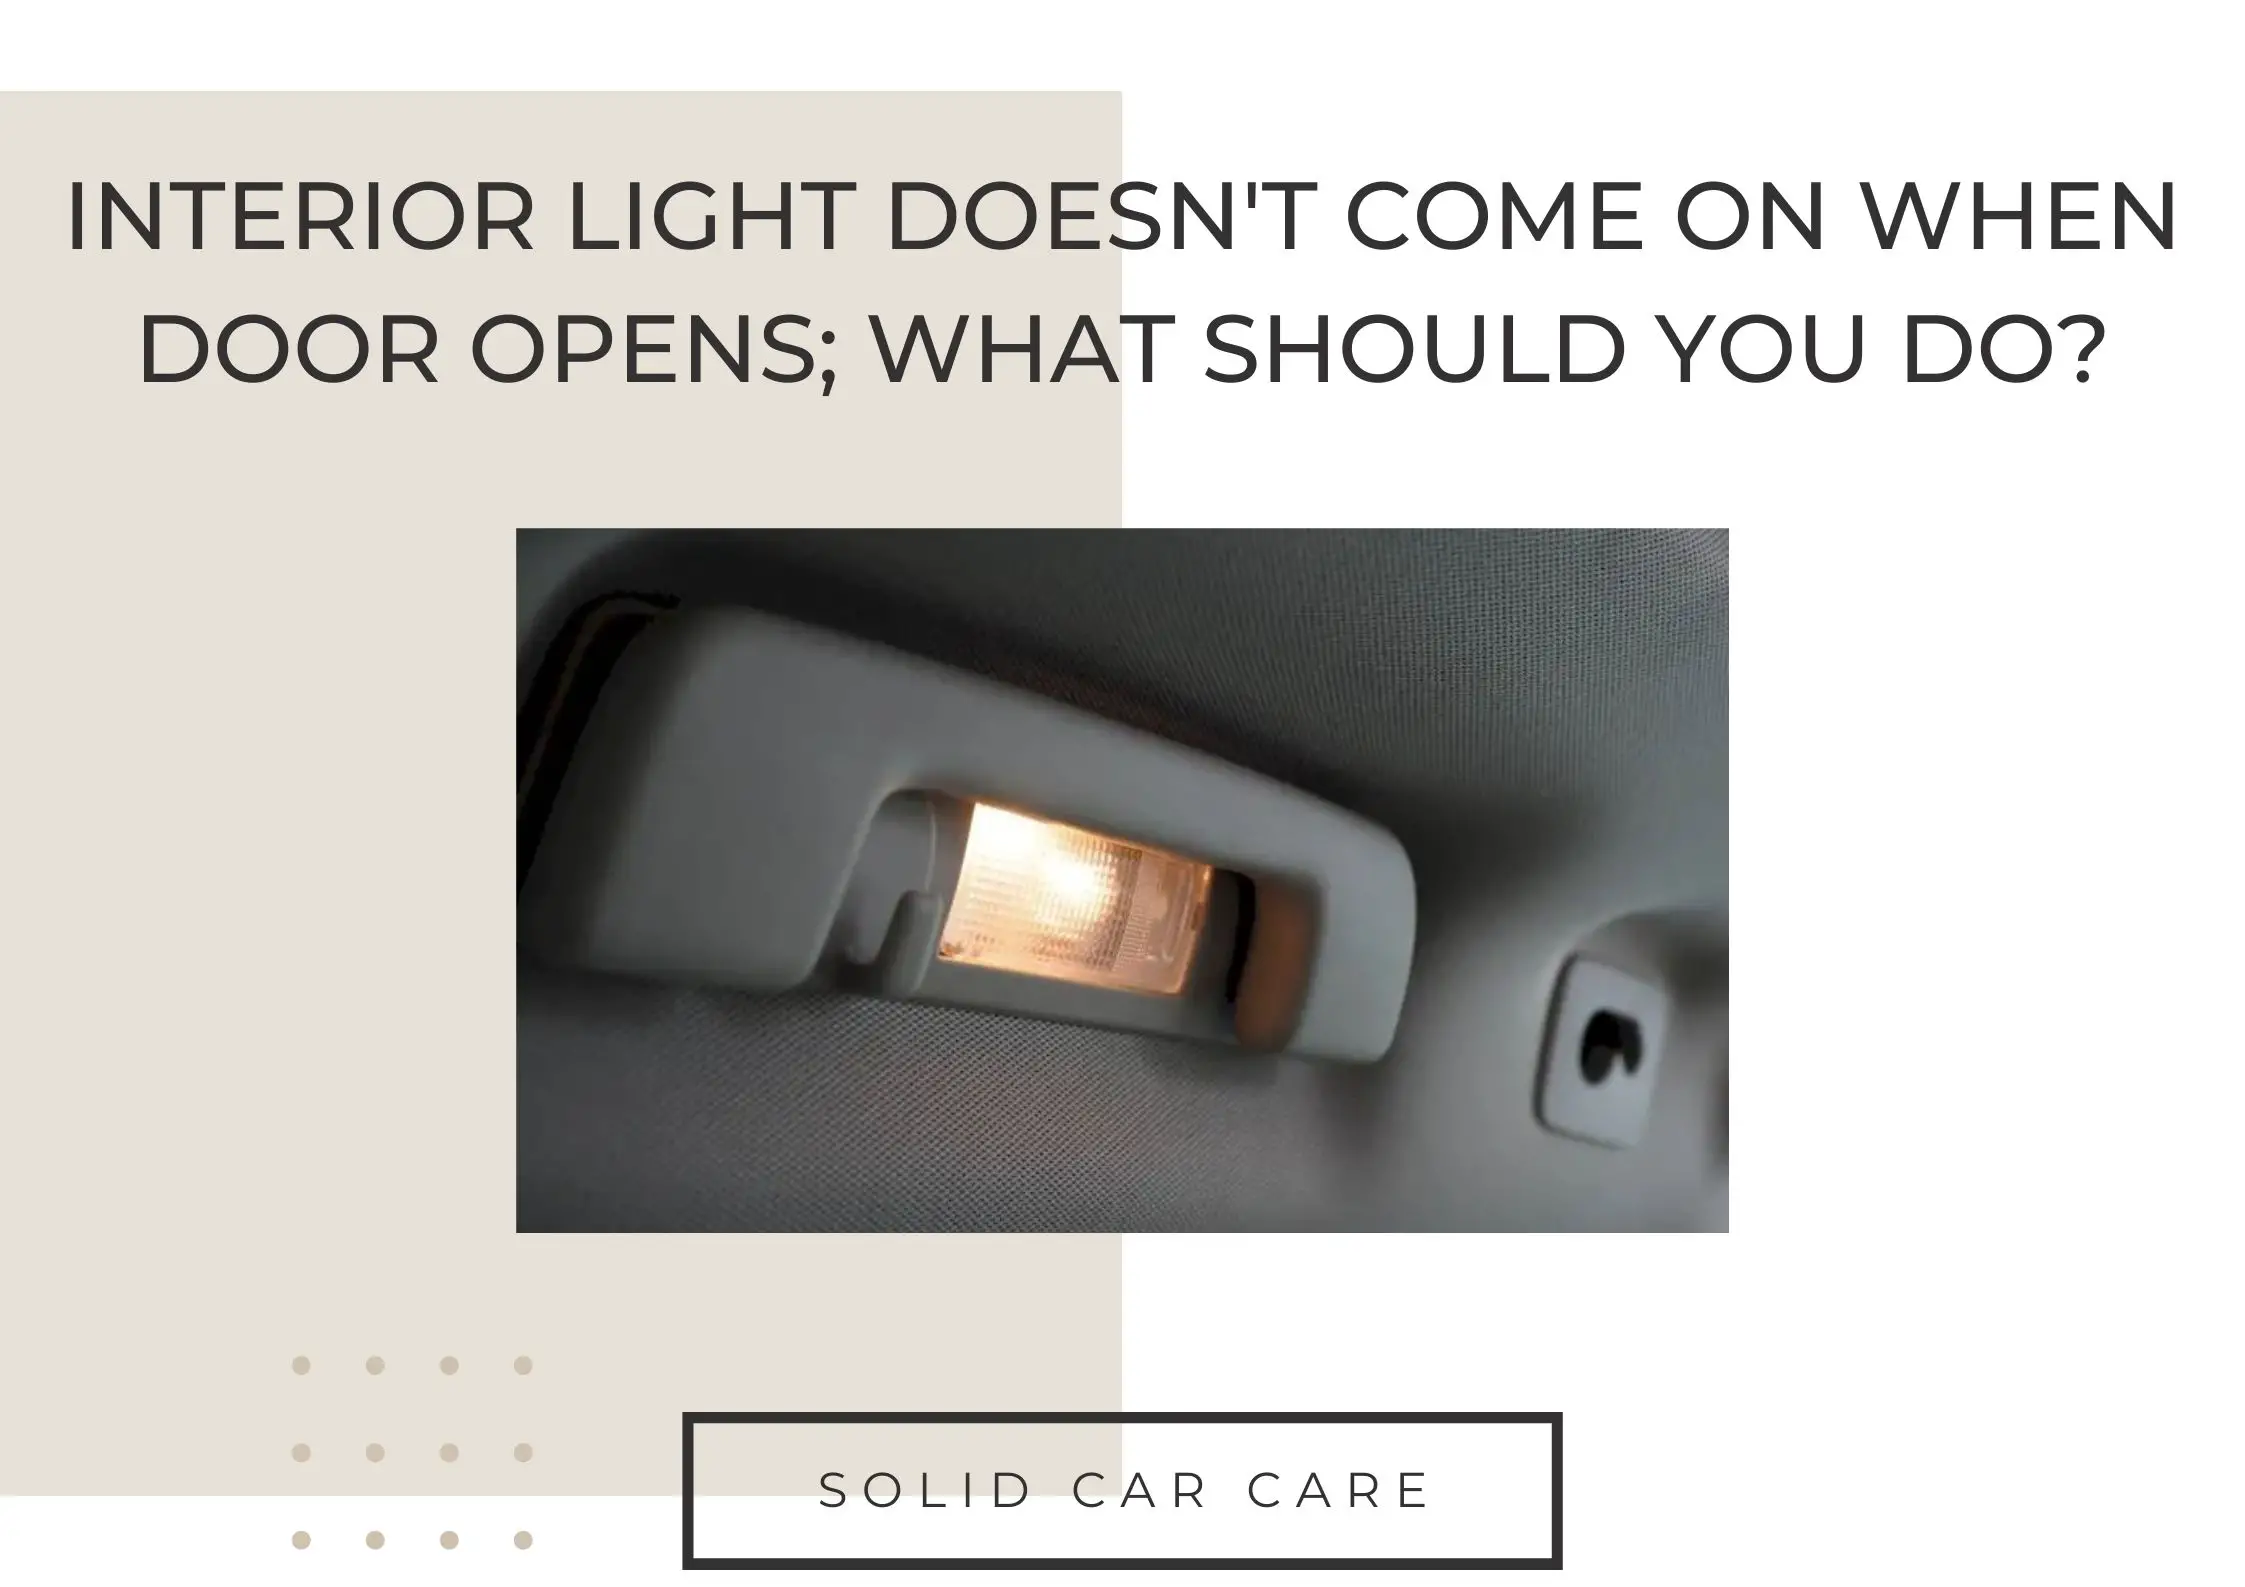 Interior Light Doesn't Come On When Door Opens